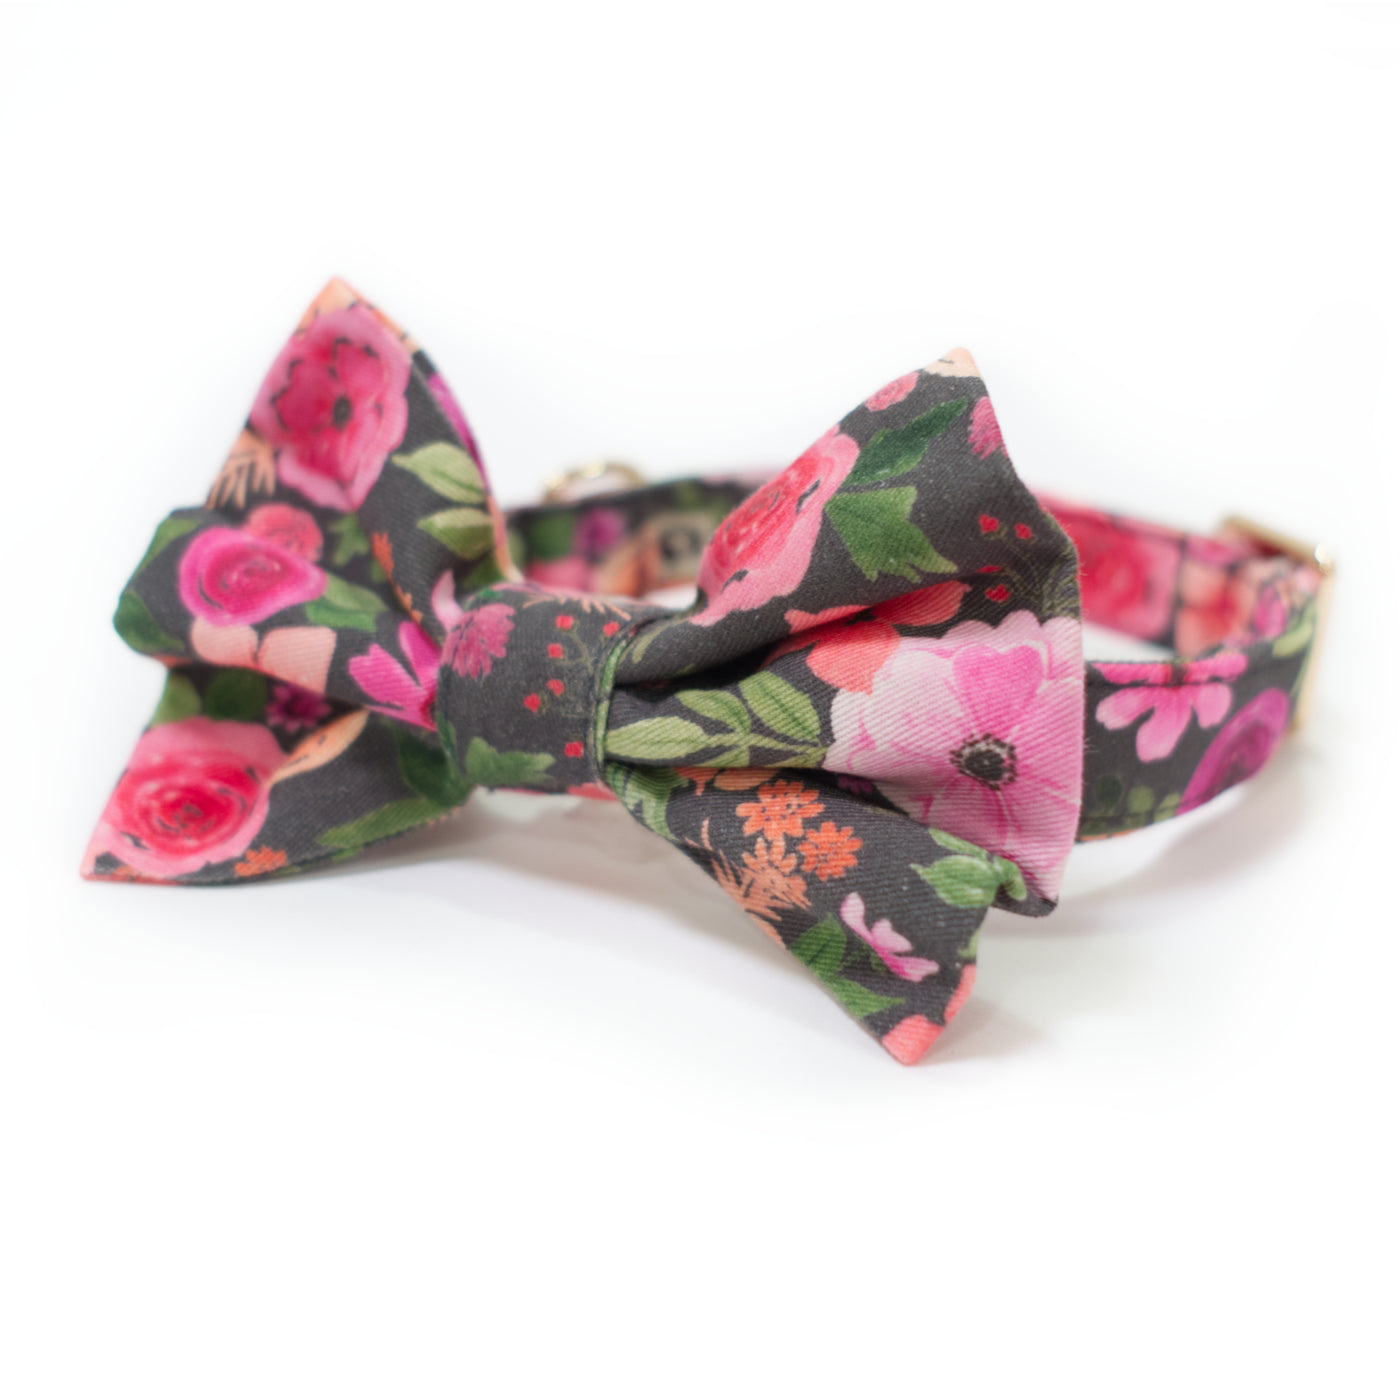 Dog collar and classic bow tie in pink floral print